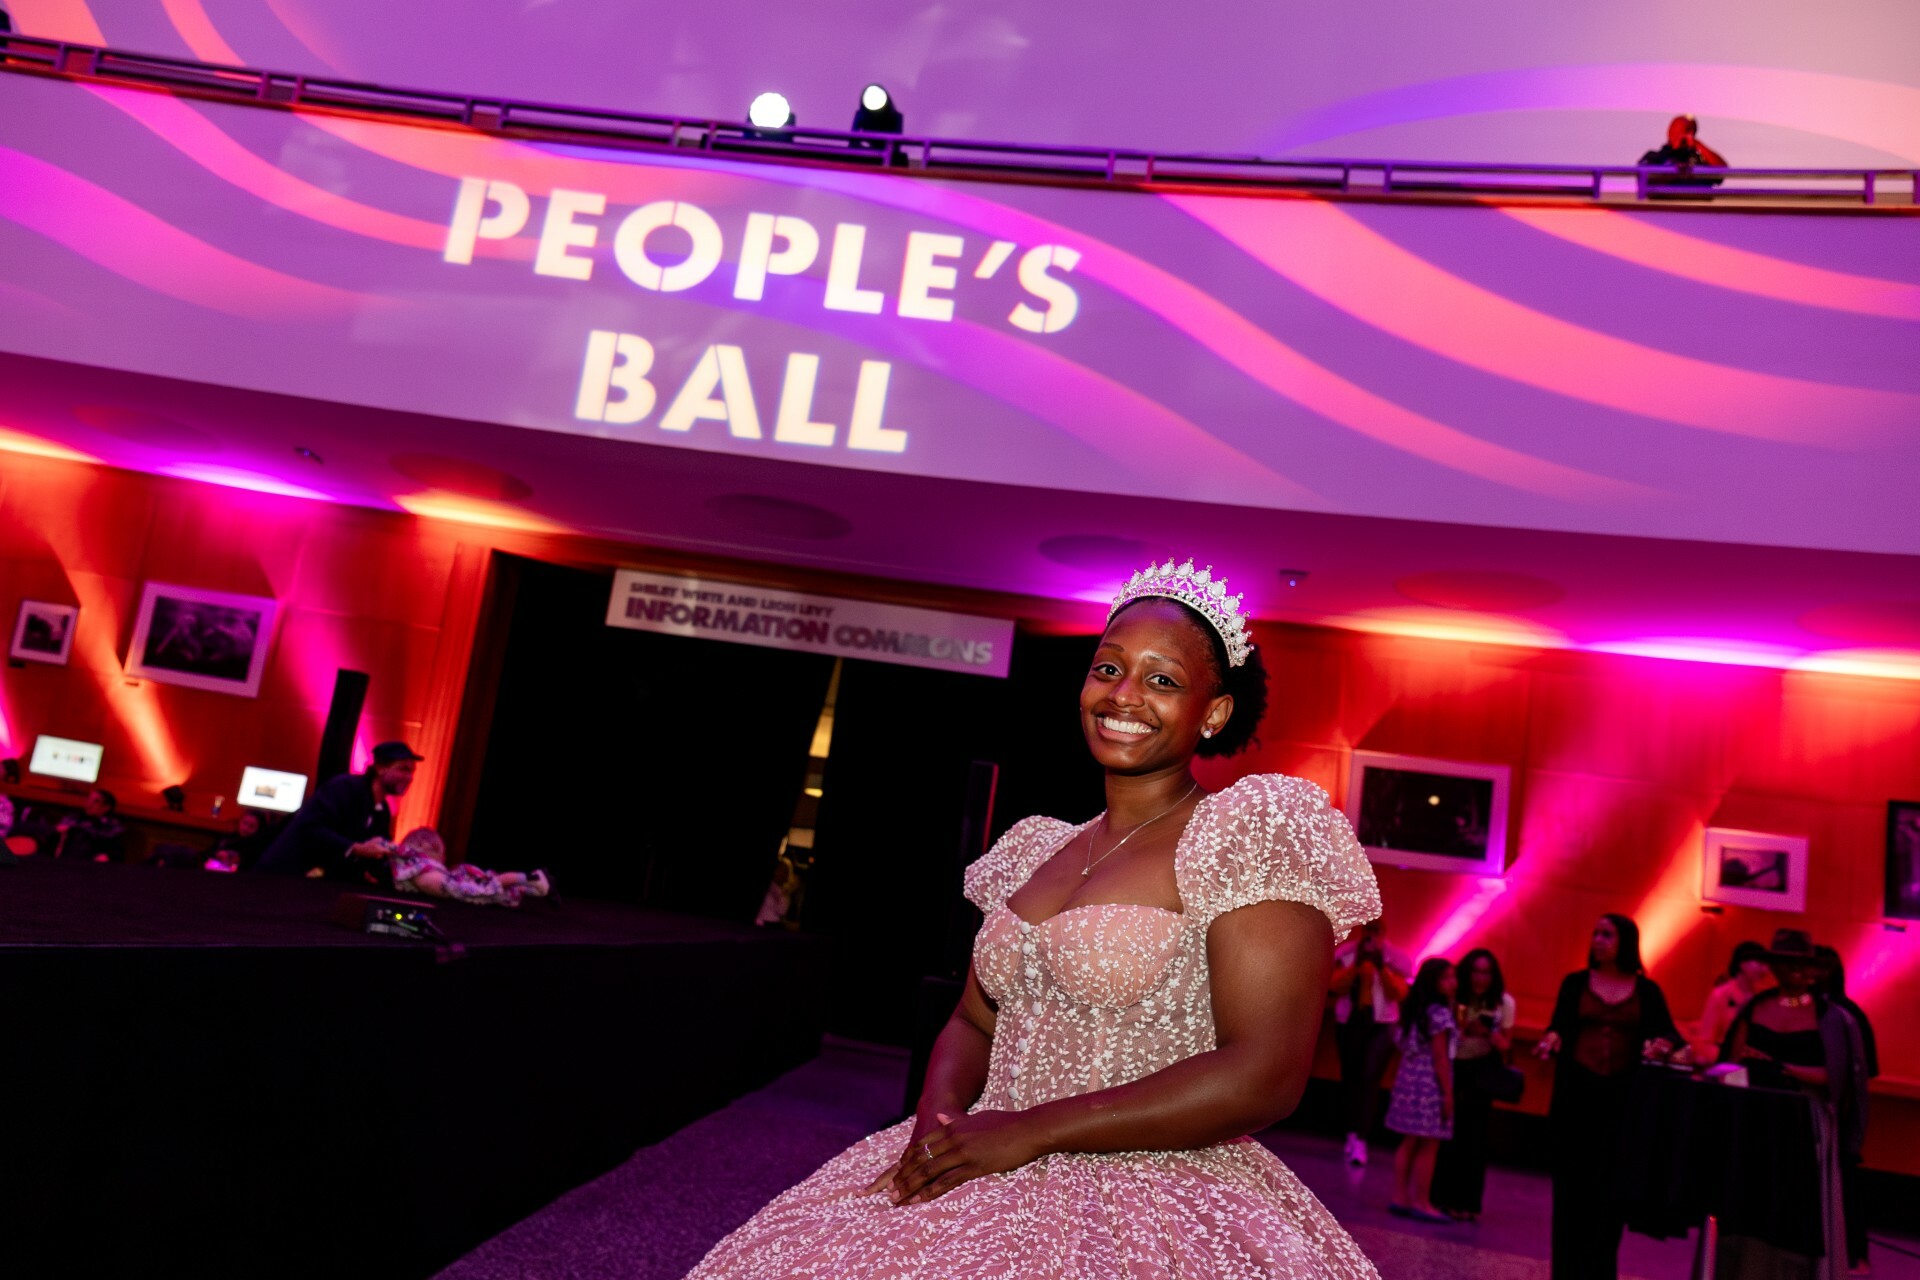 Brooklyn Public Library The People’s Ball